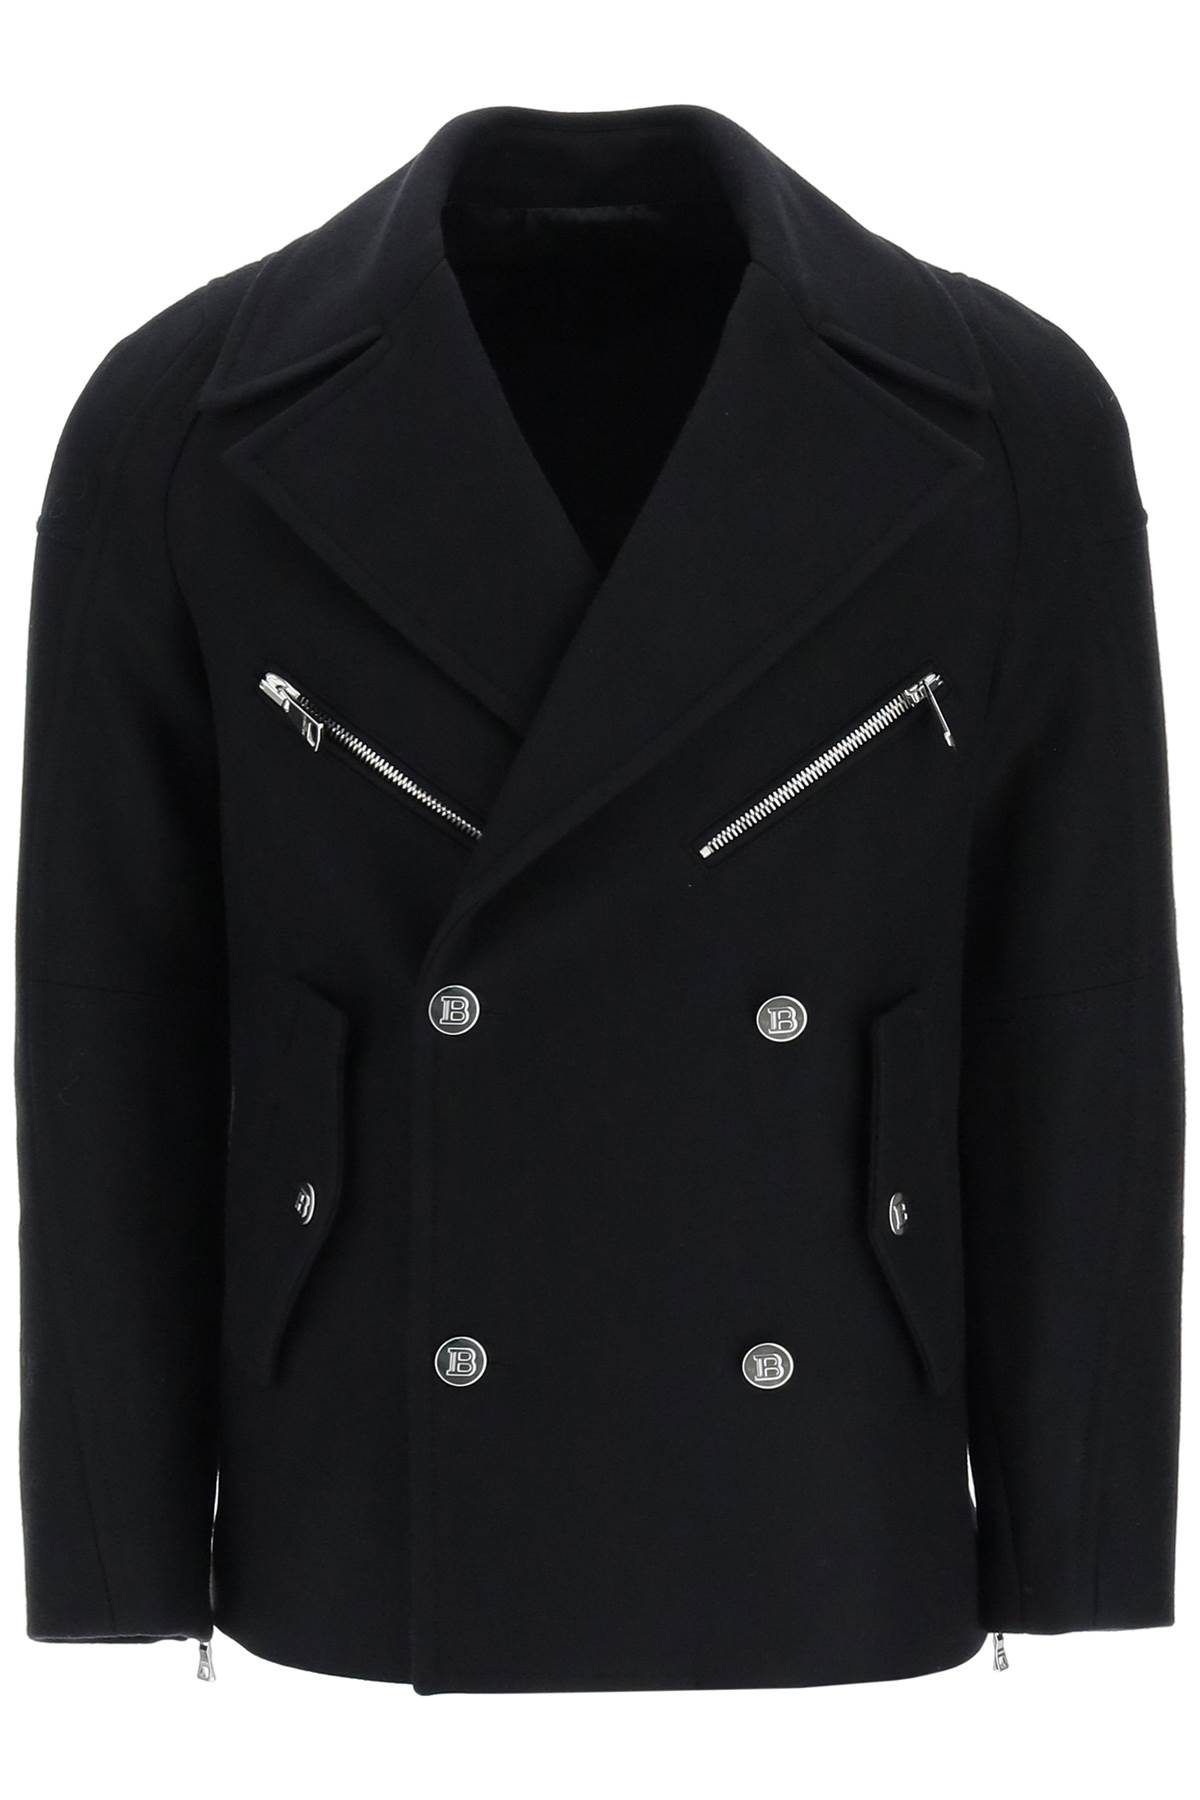 Balmain Short Double-breasted Coat With Branded Buttons